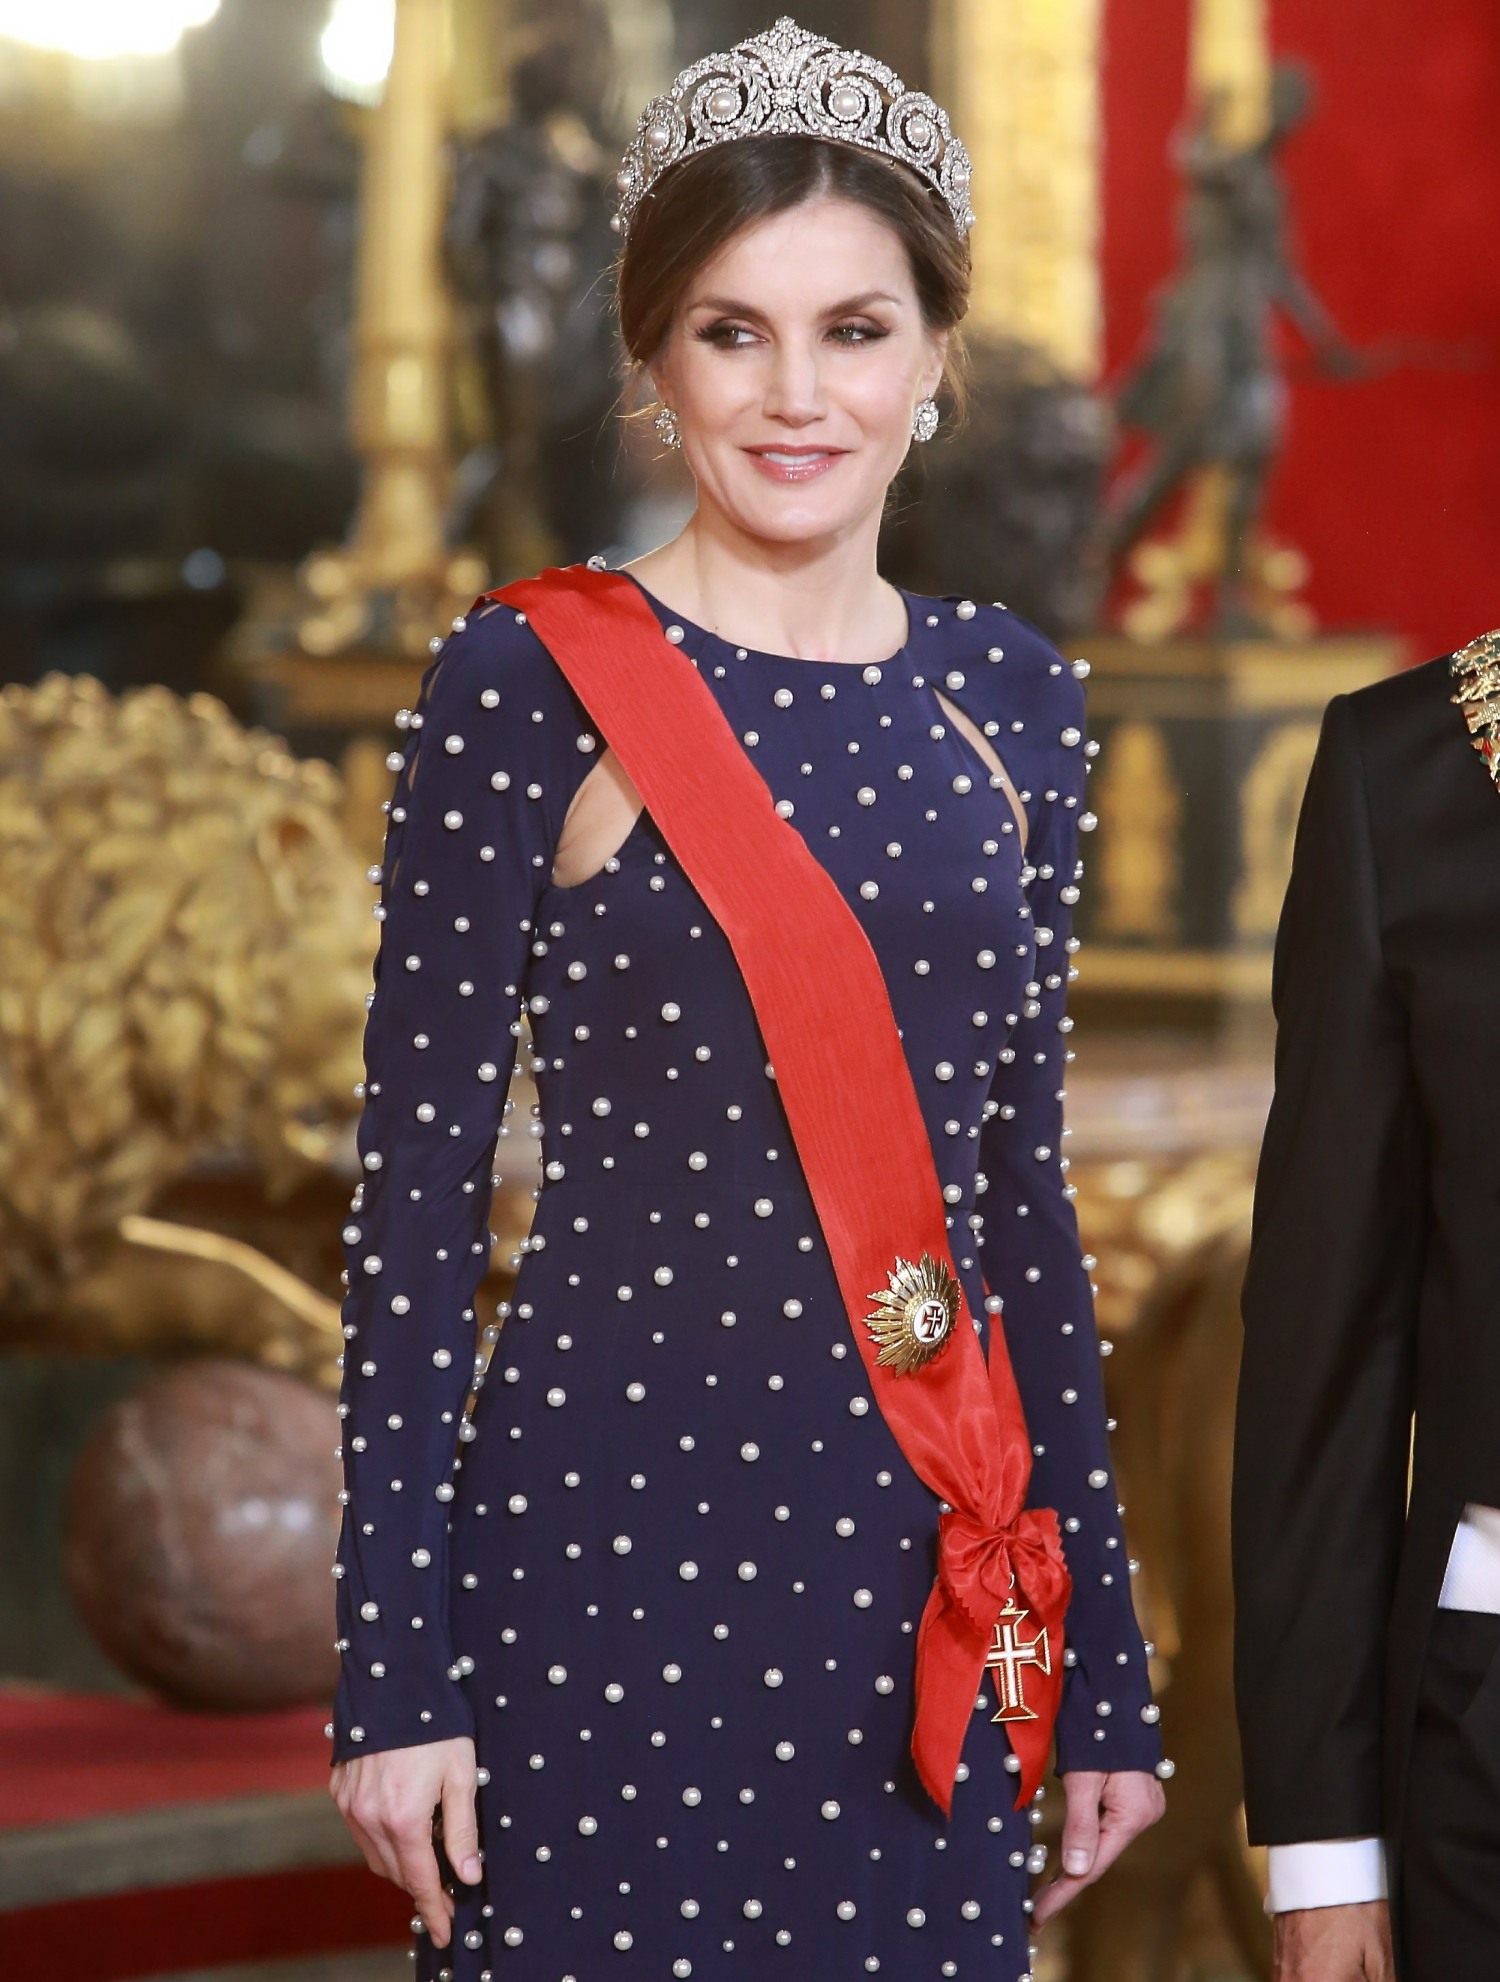 King Felipe and Queen Letizia of Spain attend gala dinner with the President of Portugal